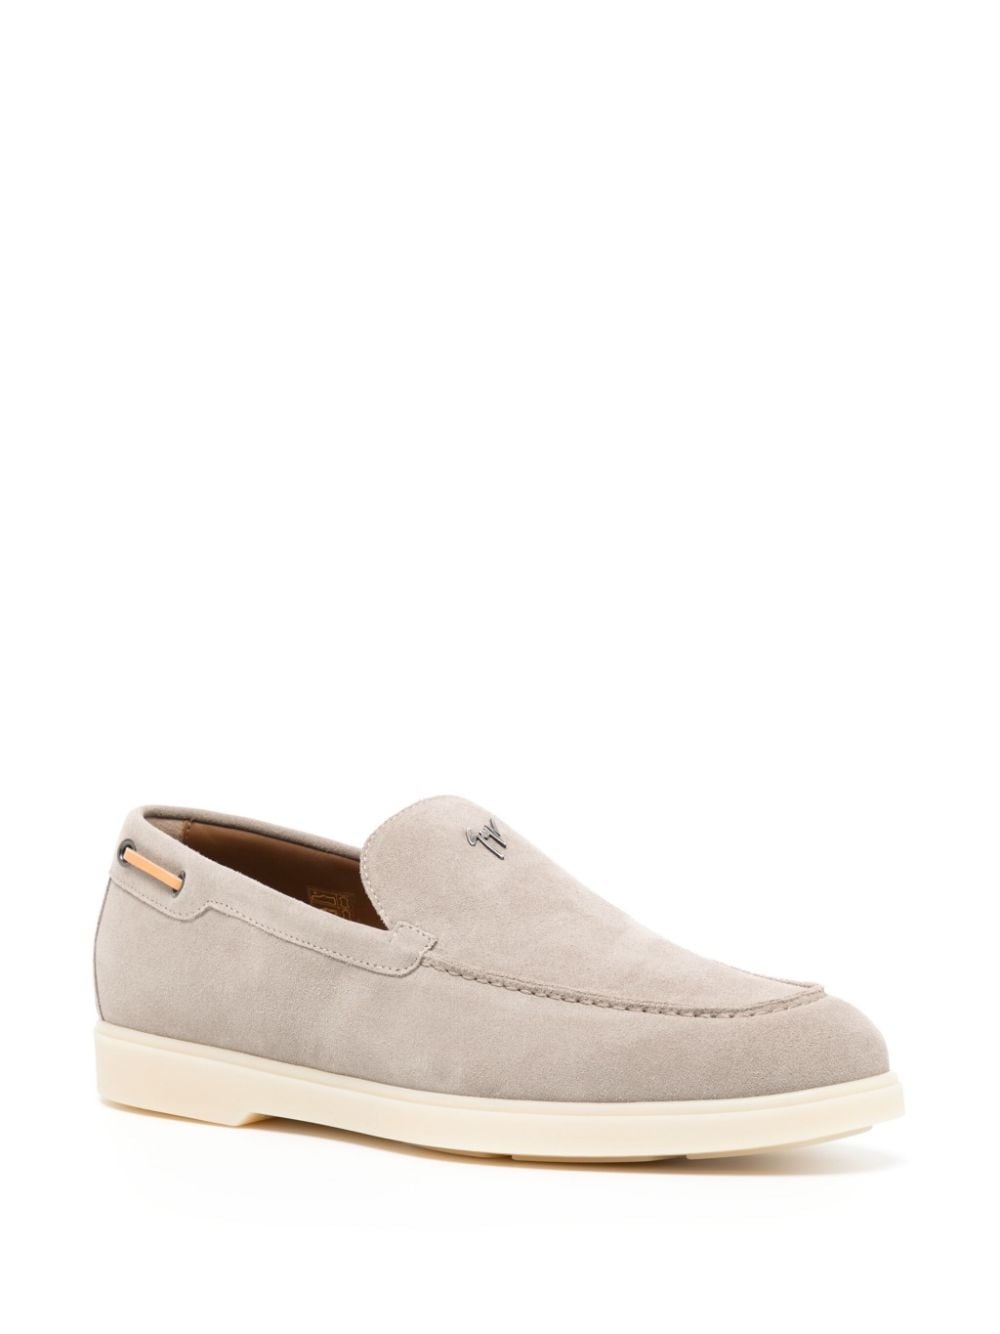 The Maui suede loafers - 2